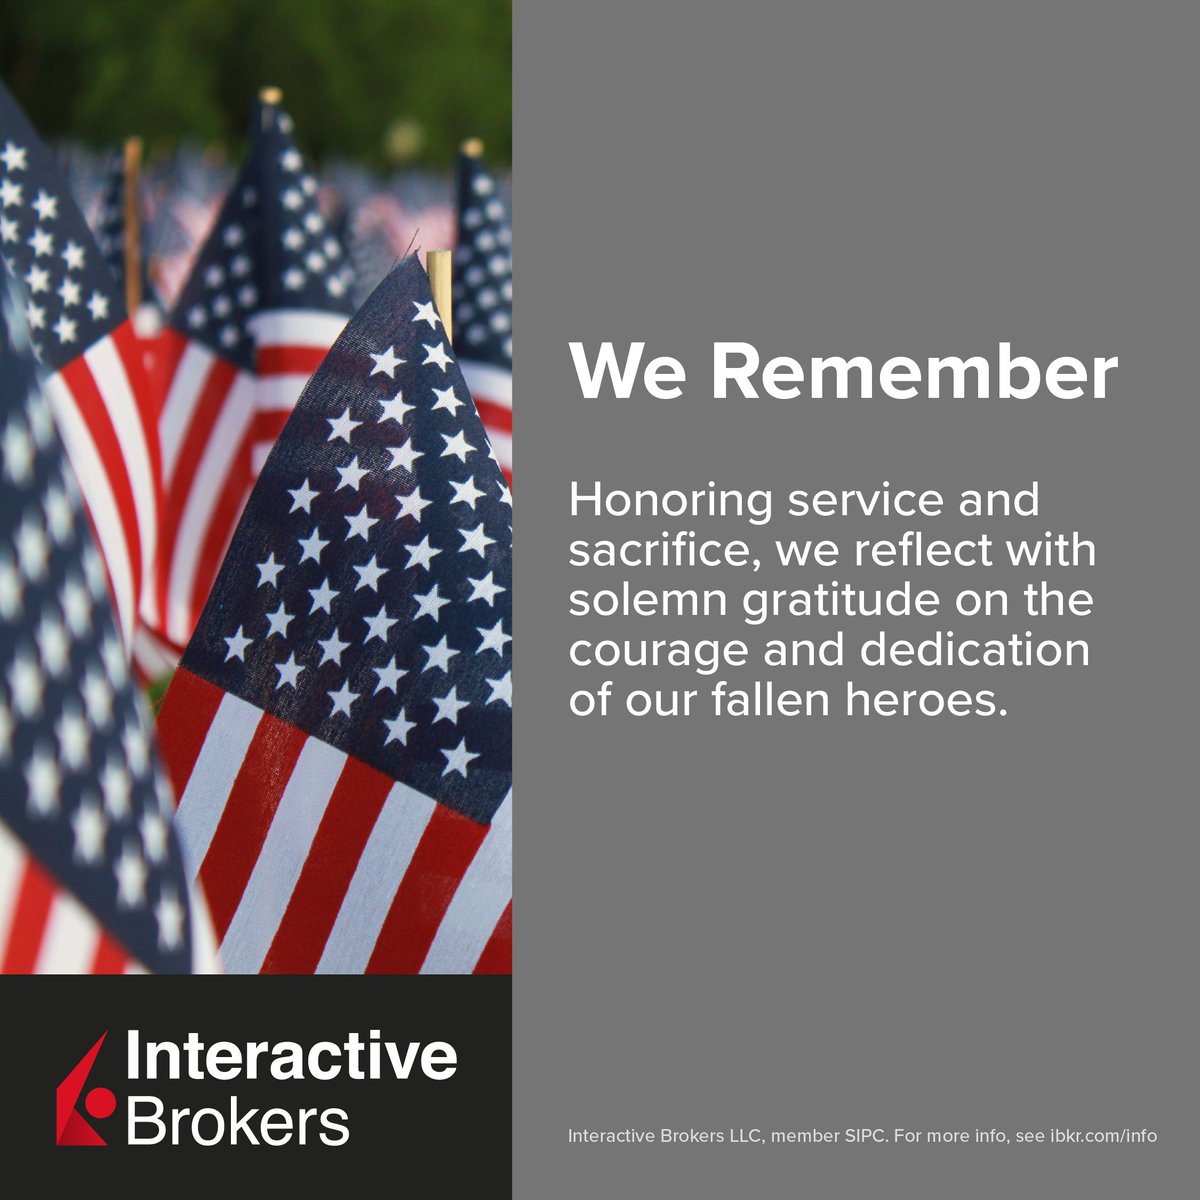 We reflect with solemn gratitude this Memorial Day 🇺🇸 In observance of this important day, US markets will remain closed on Monday, May 27.